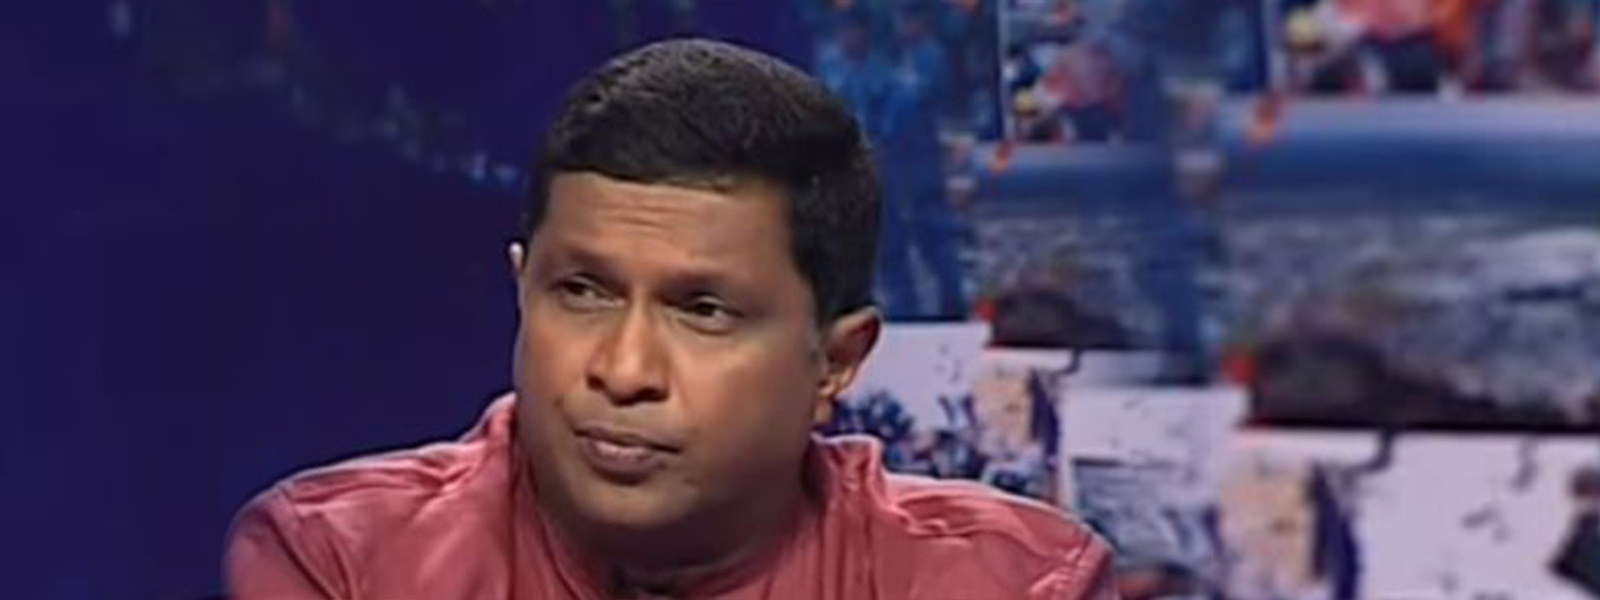 Maithri Gunaratne arrested and then released